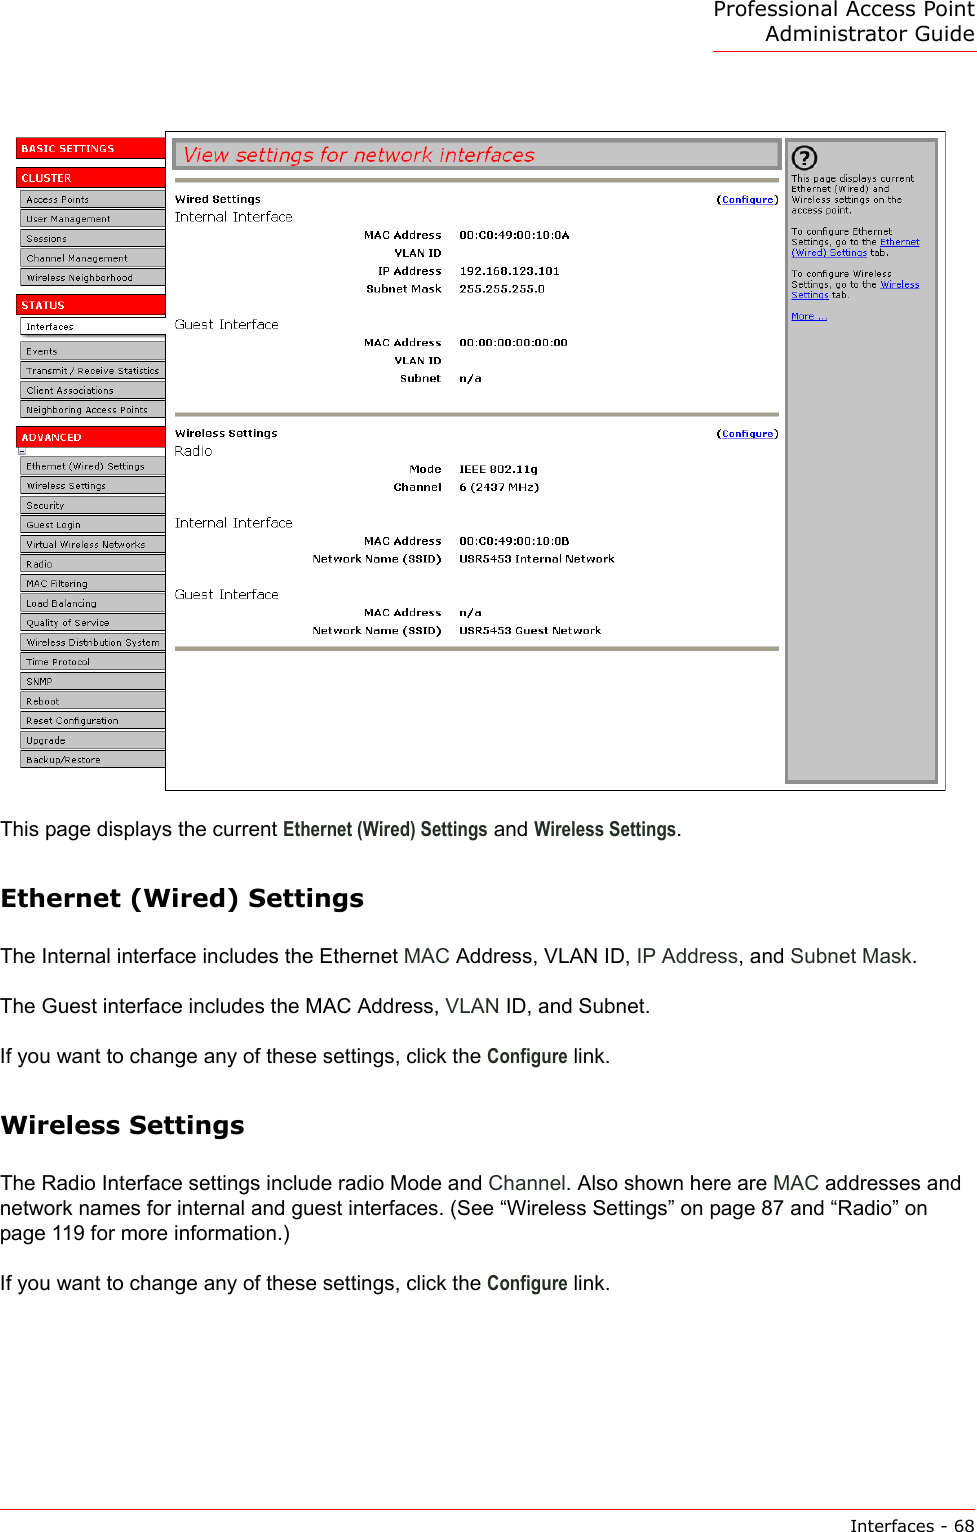 Professional Access Point Administrator GuideInterfaces - 68This page displays the current Ethernet (Wired) Settings and Wireless Settings.Ethernet (Wired) SettingsThe Internal interface includes the Ethernet MAC Address, VLAN ID, IP Address, and Subnet Mask.The Guest interface includes the MAC Address, VLAN ID, and Subnet.If you want to change any of these settings, click the Configure link.Wireless SettingsThe Radio Interface settings include radio Mode and Channel. Also shown here are MAC addresses and network names for internal and guest interfaces. (See “Wireless Settings” on page 87 and “Radio” on page 119 for more information.)If you want to change any of these settings, click the Configure link.